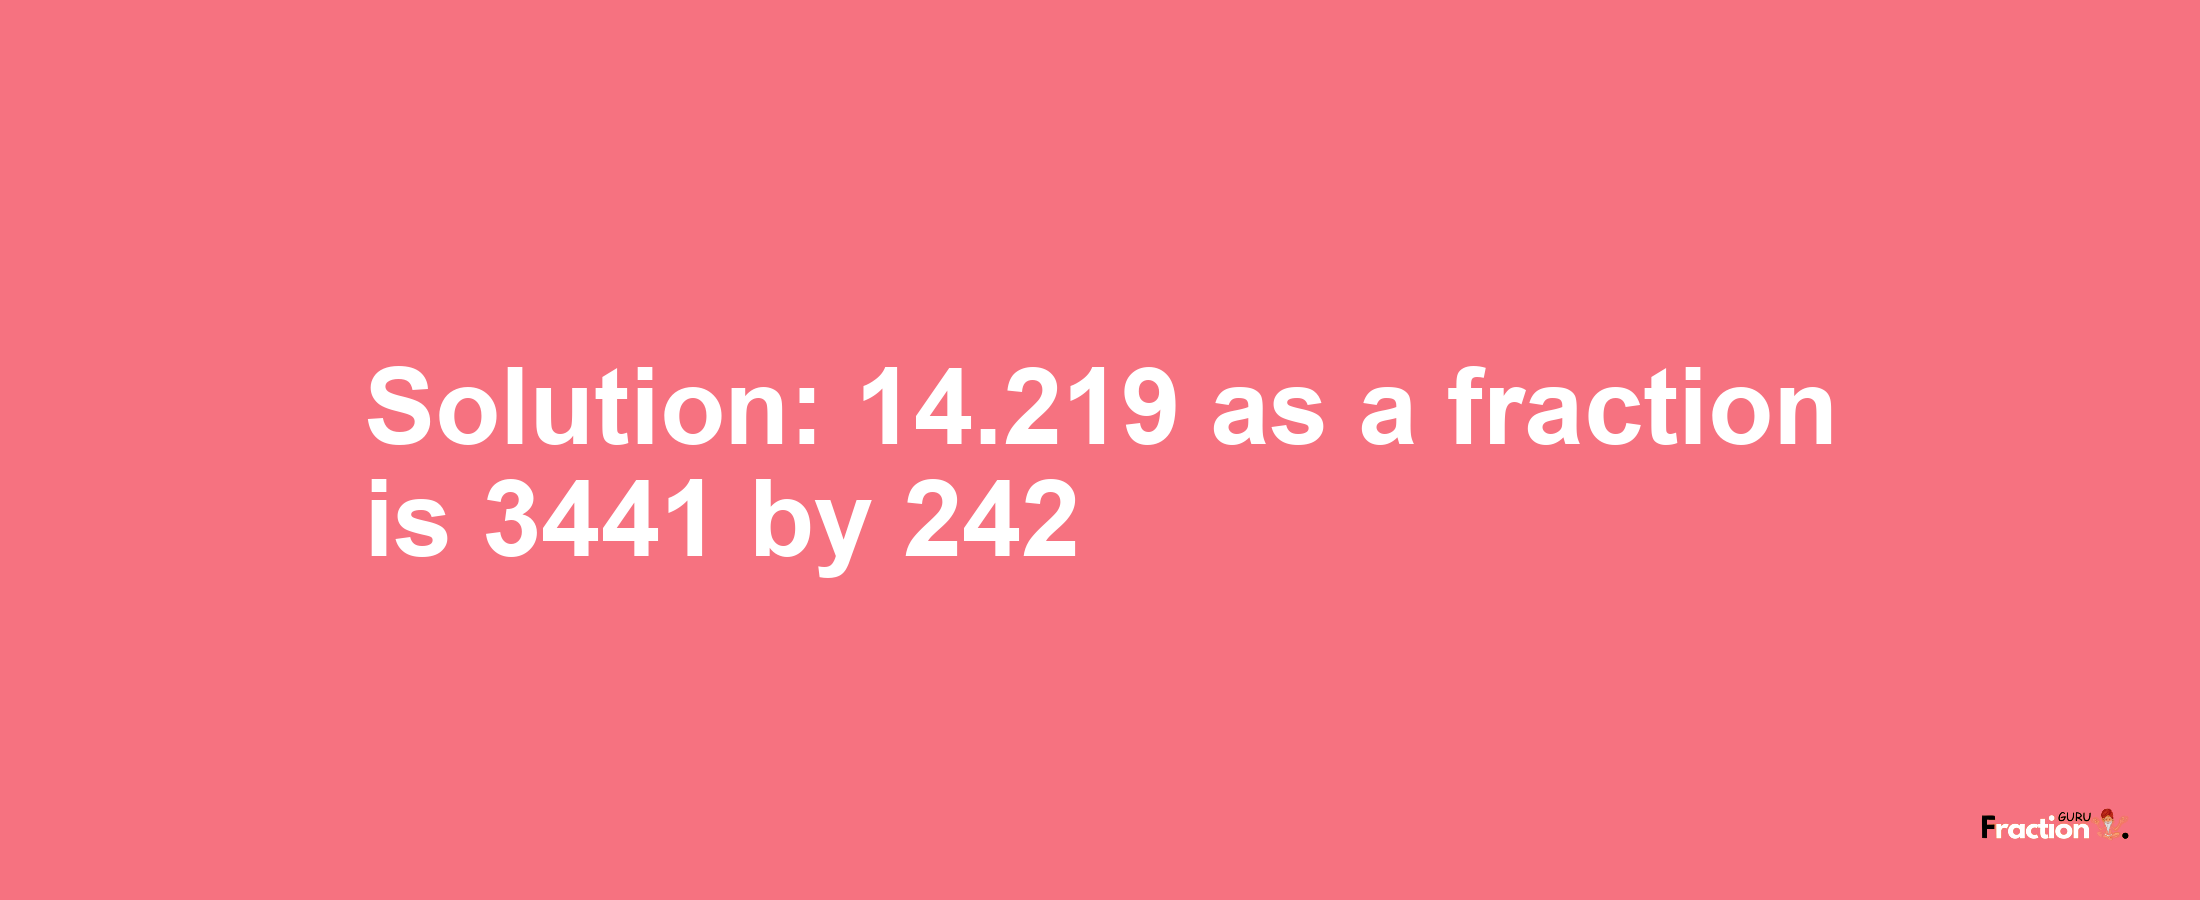 Solution:14.219 as a fraction is 3441/242